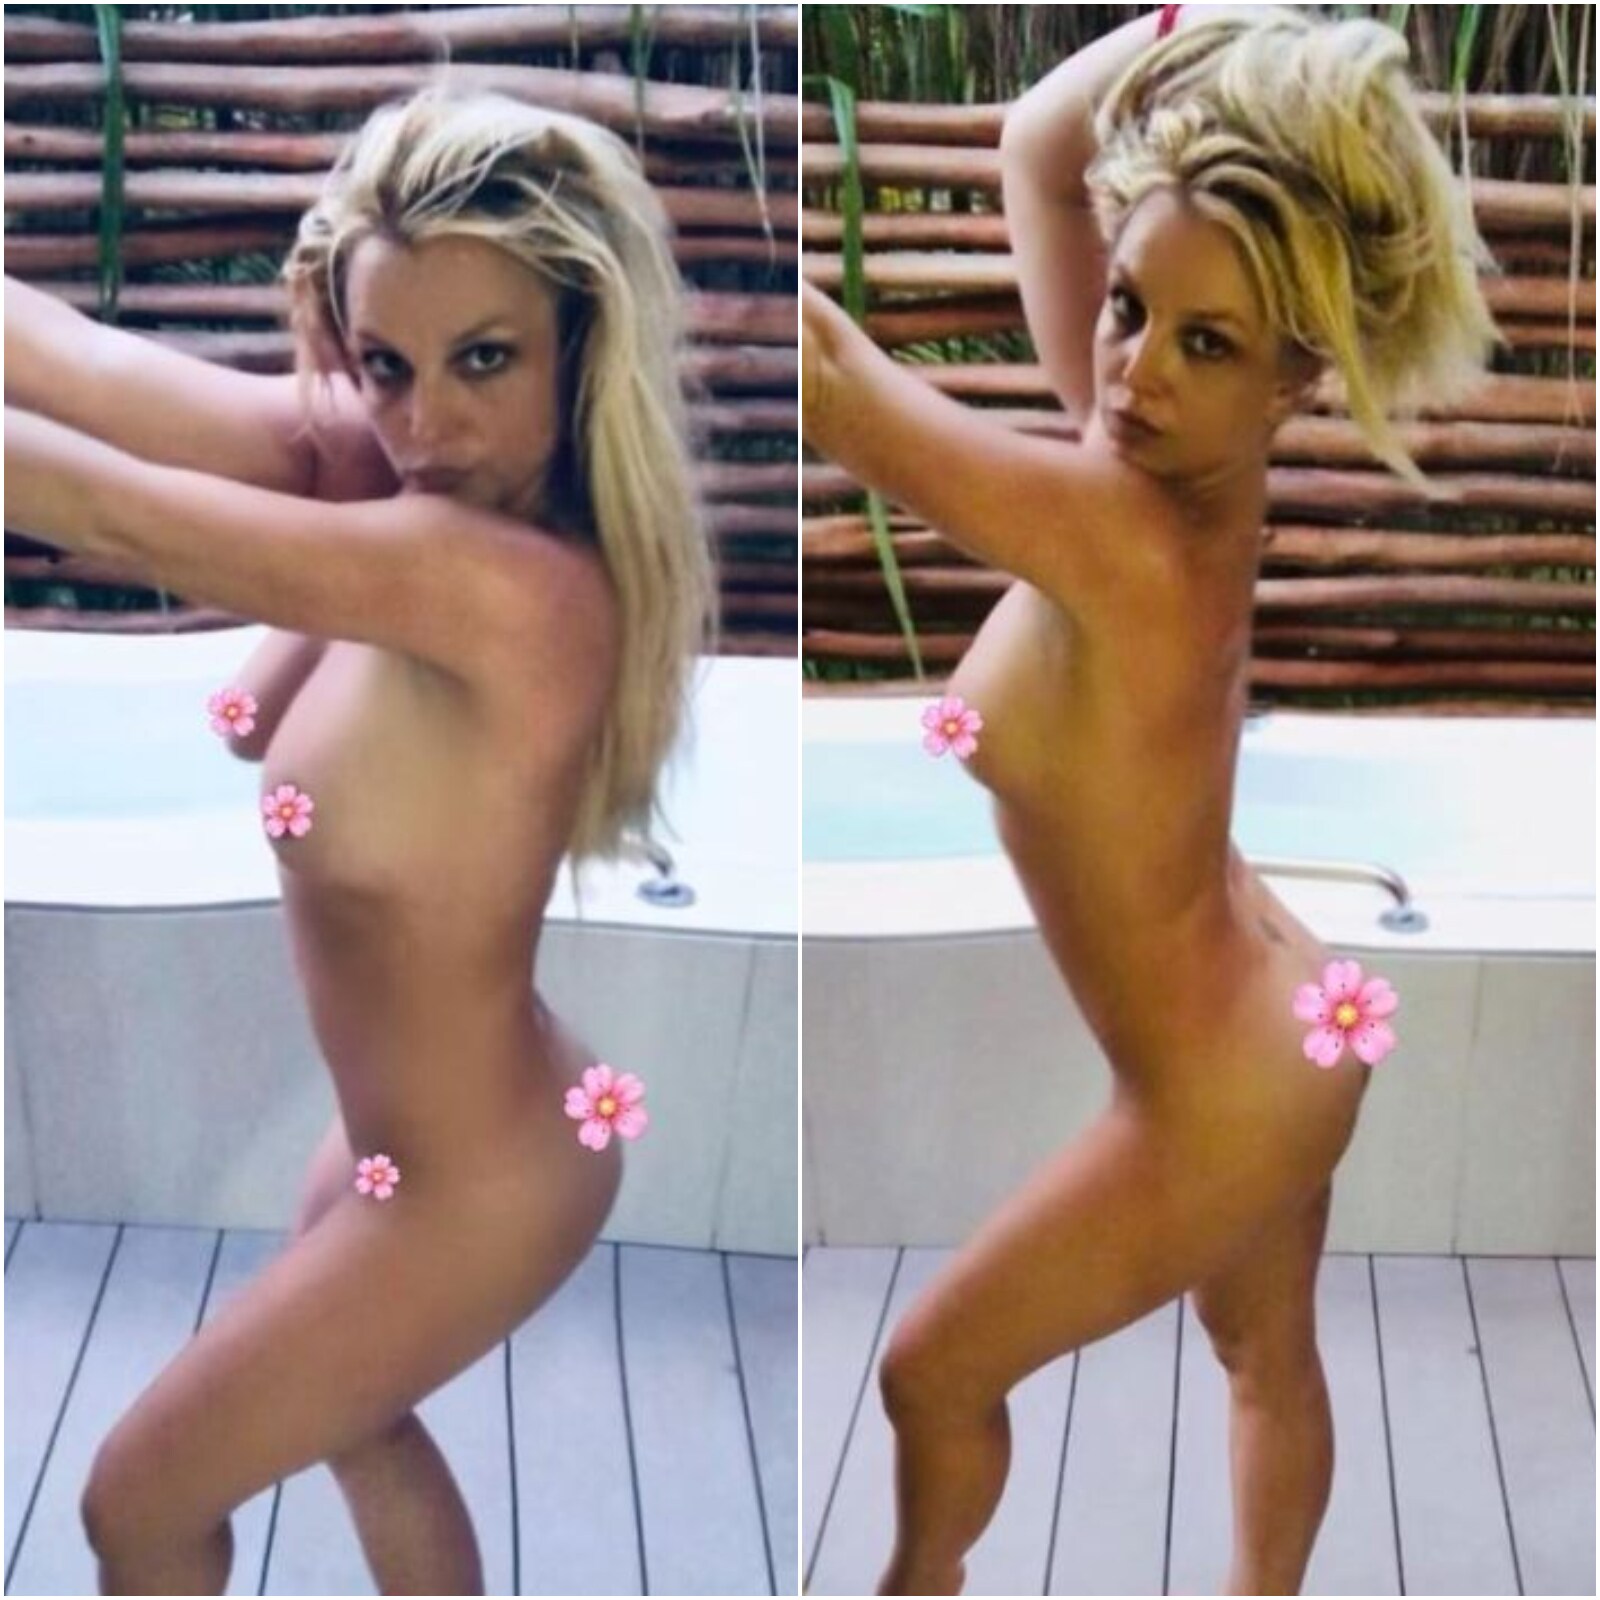 Brittany spears latest nude photos